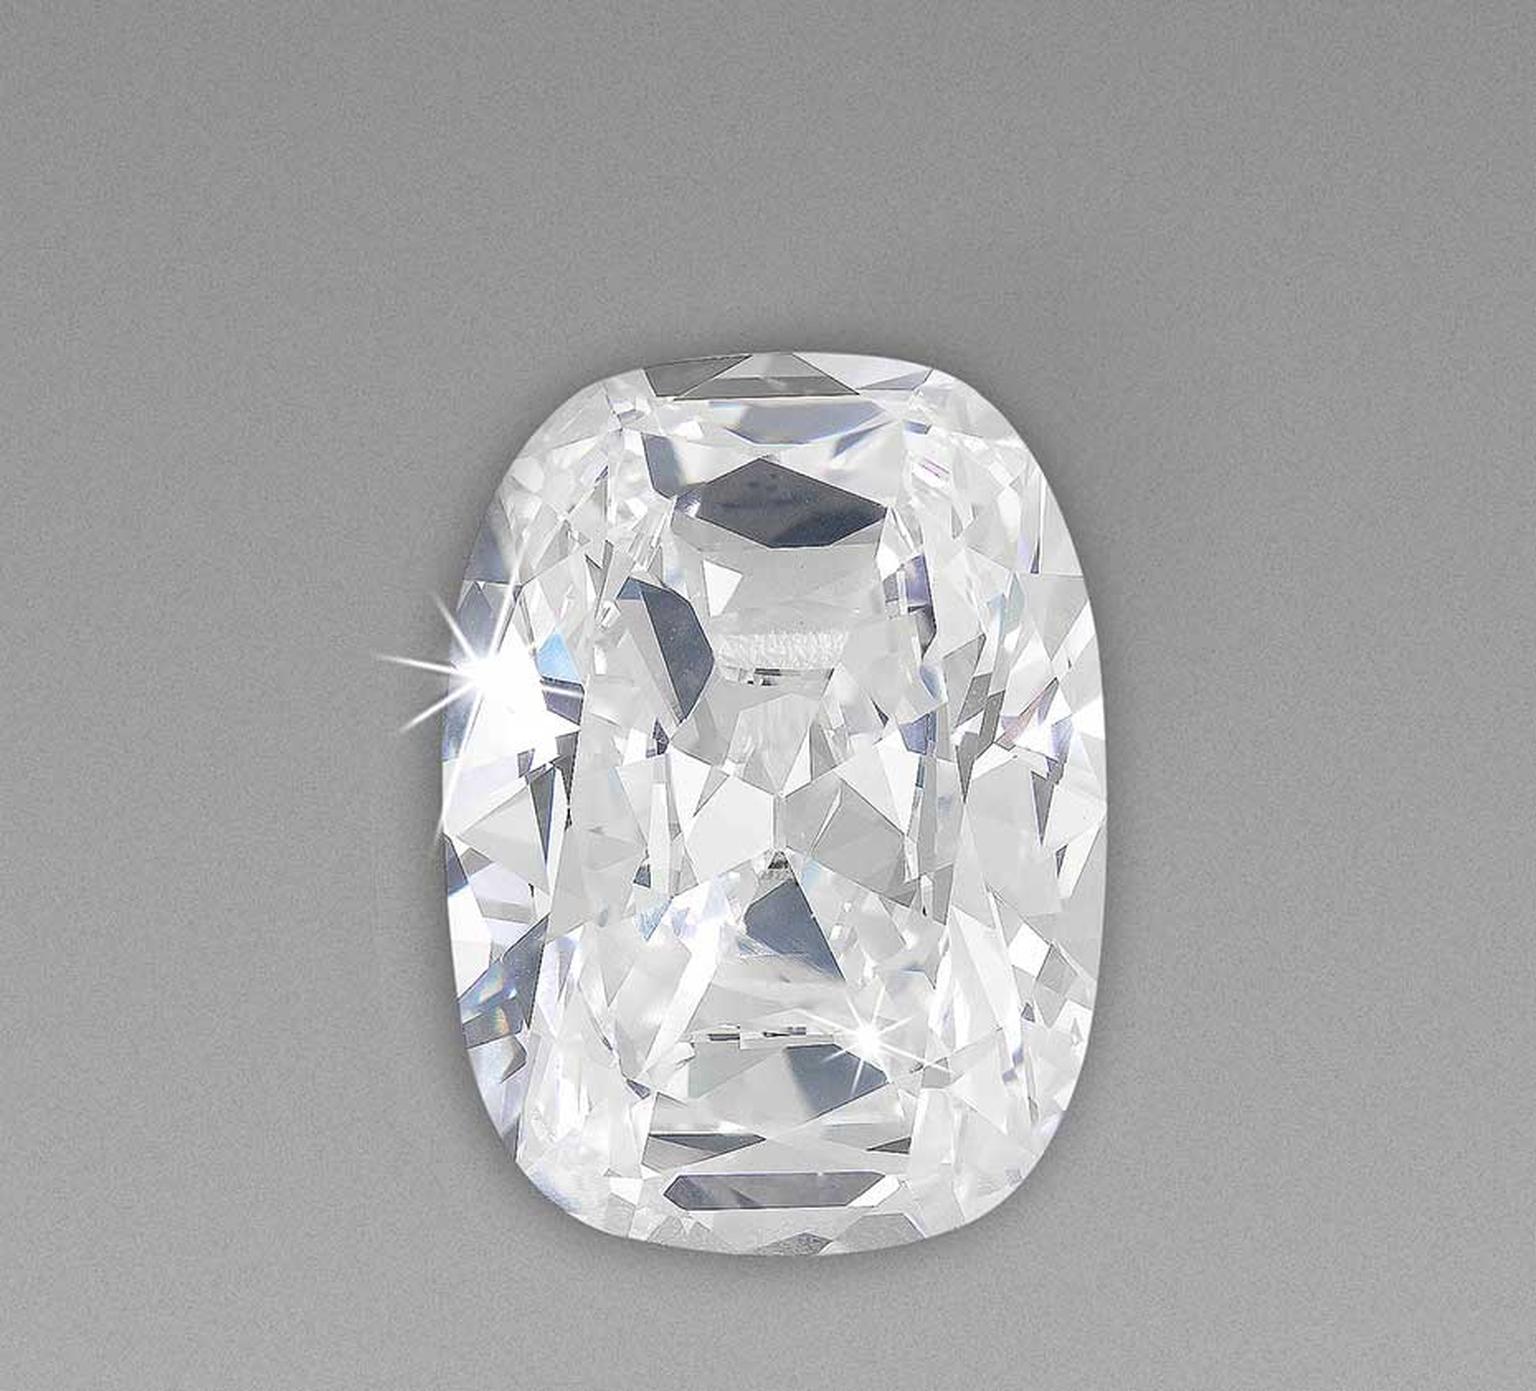 Unveiled at the 2014 Biennale des Antiquaires in Paris, David Morris’ 60.15 carat diamond has been classified as D colour, which is the top grade for colourless diamonds. It has also been classified as Internally Flawless, with a clarity that is clean as 